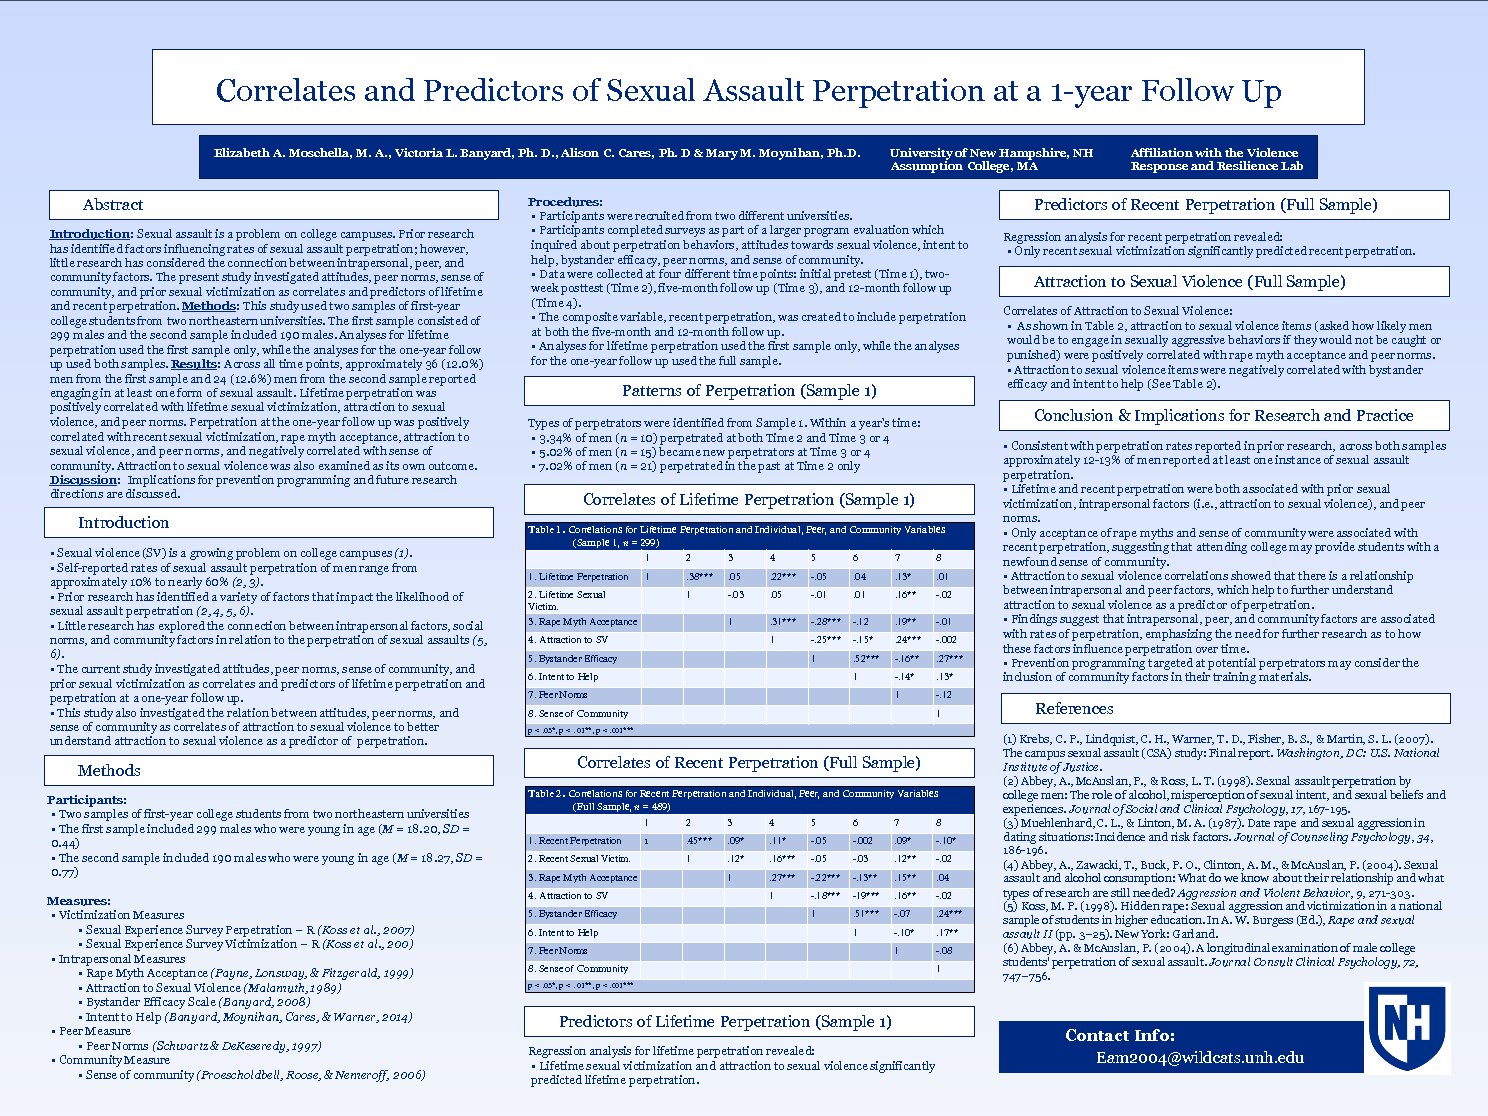 Correlates And Predictors Of Sexual Assault Perpetration At A 1-Year Follow Up by eam2004